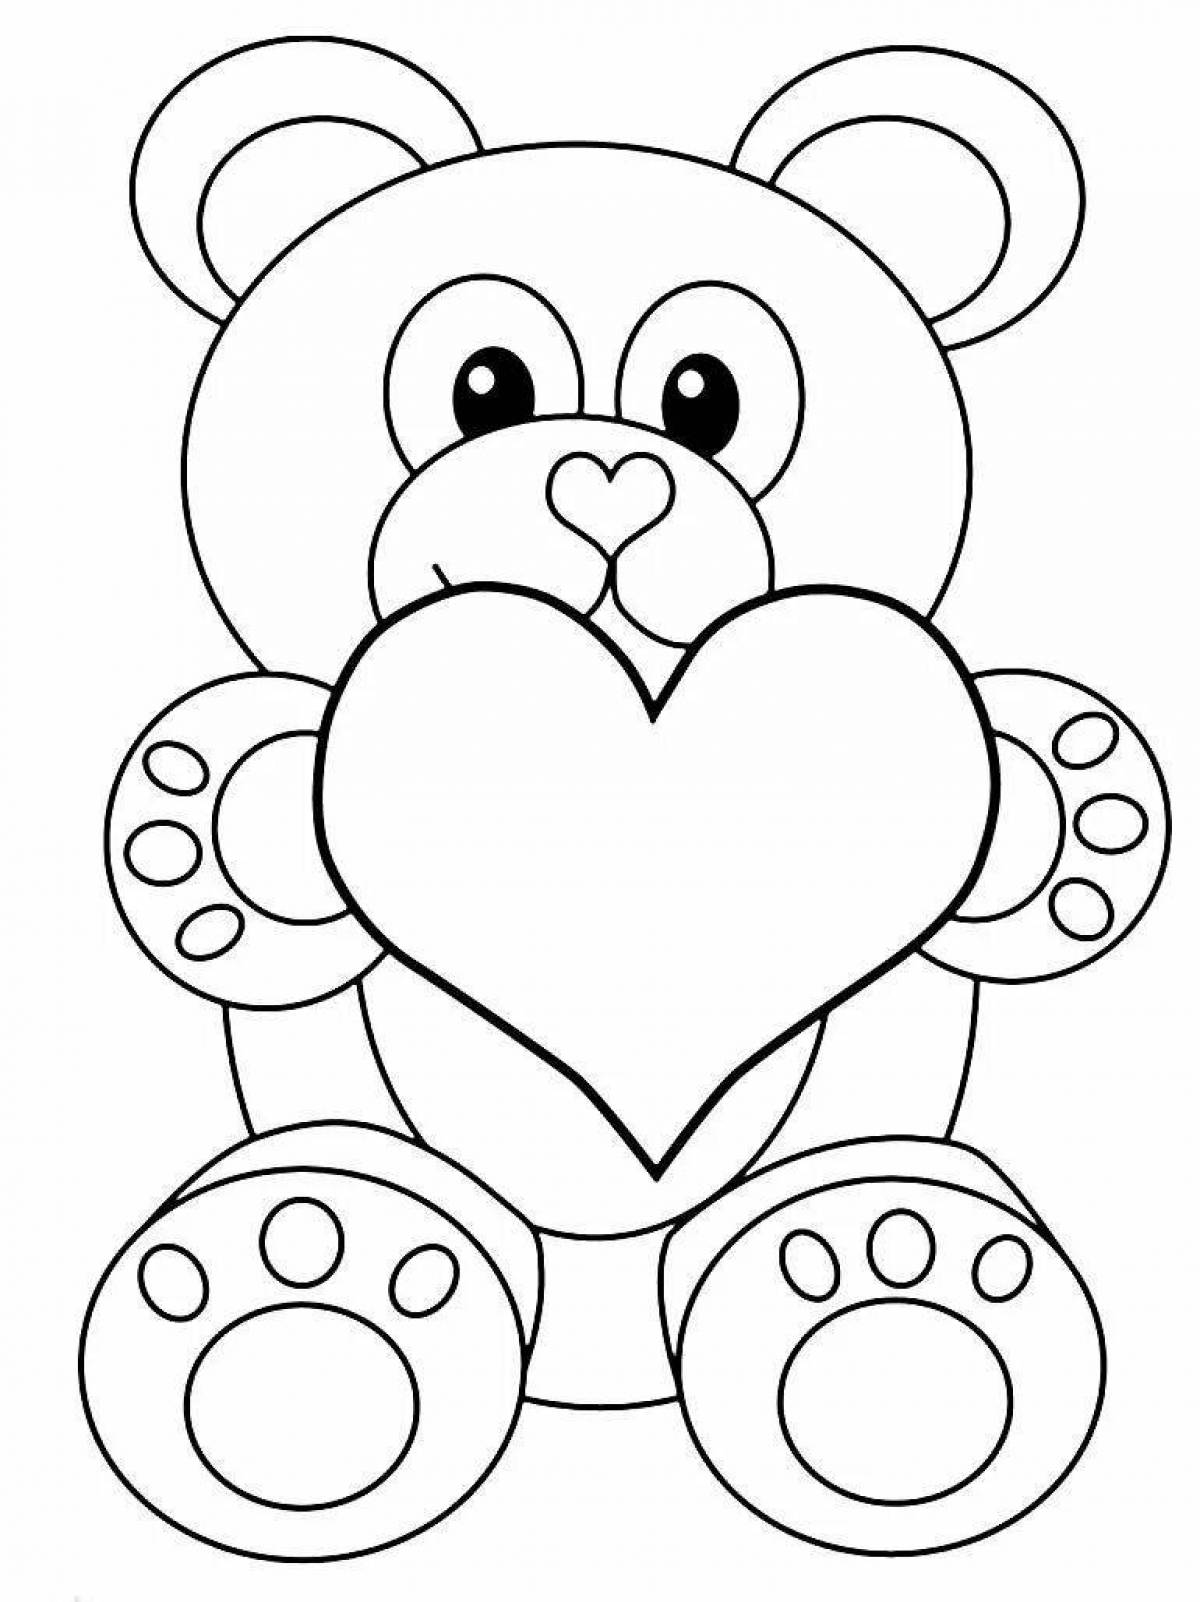 Playful teddy bear with heart coloring book